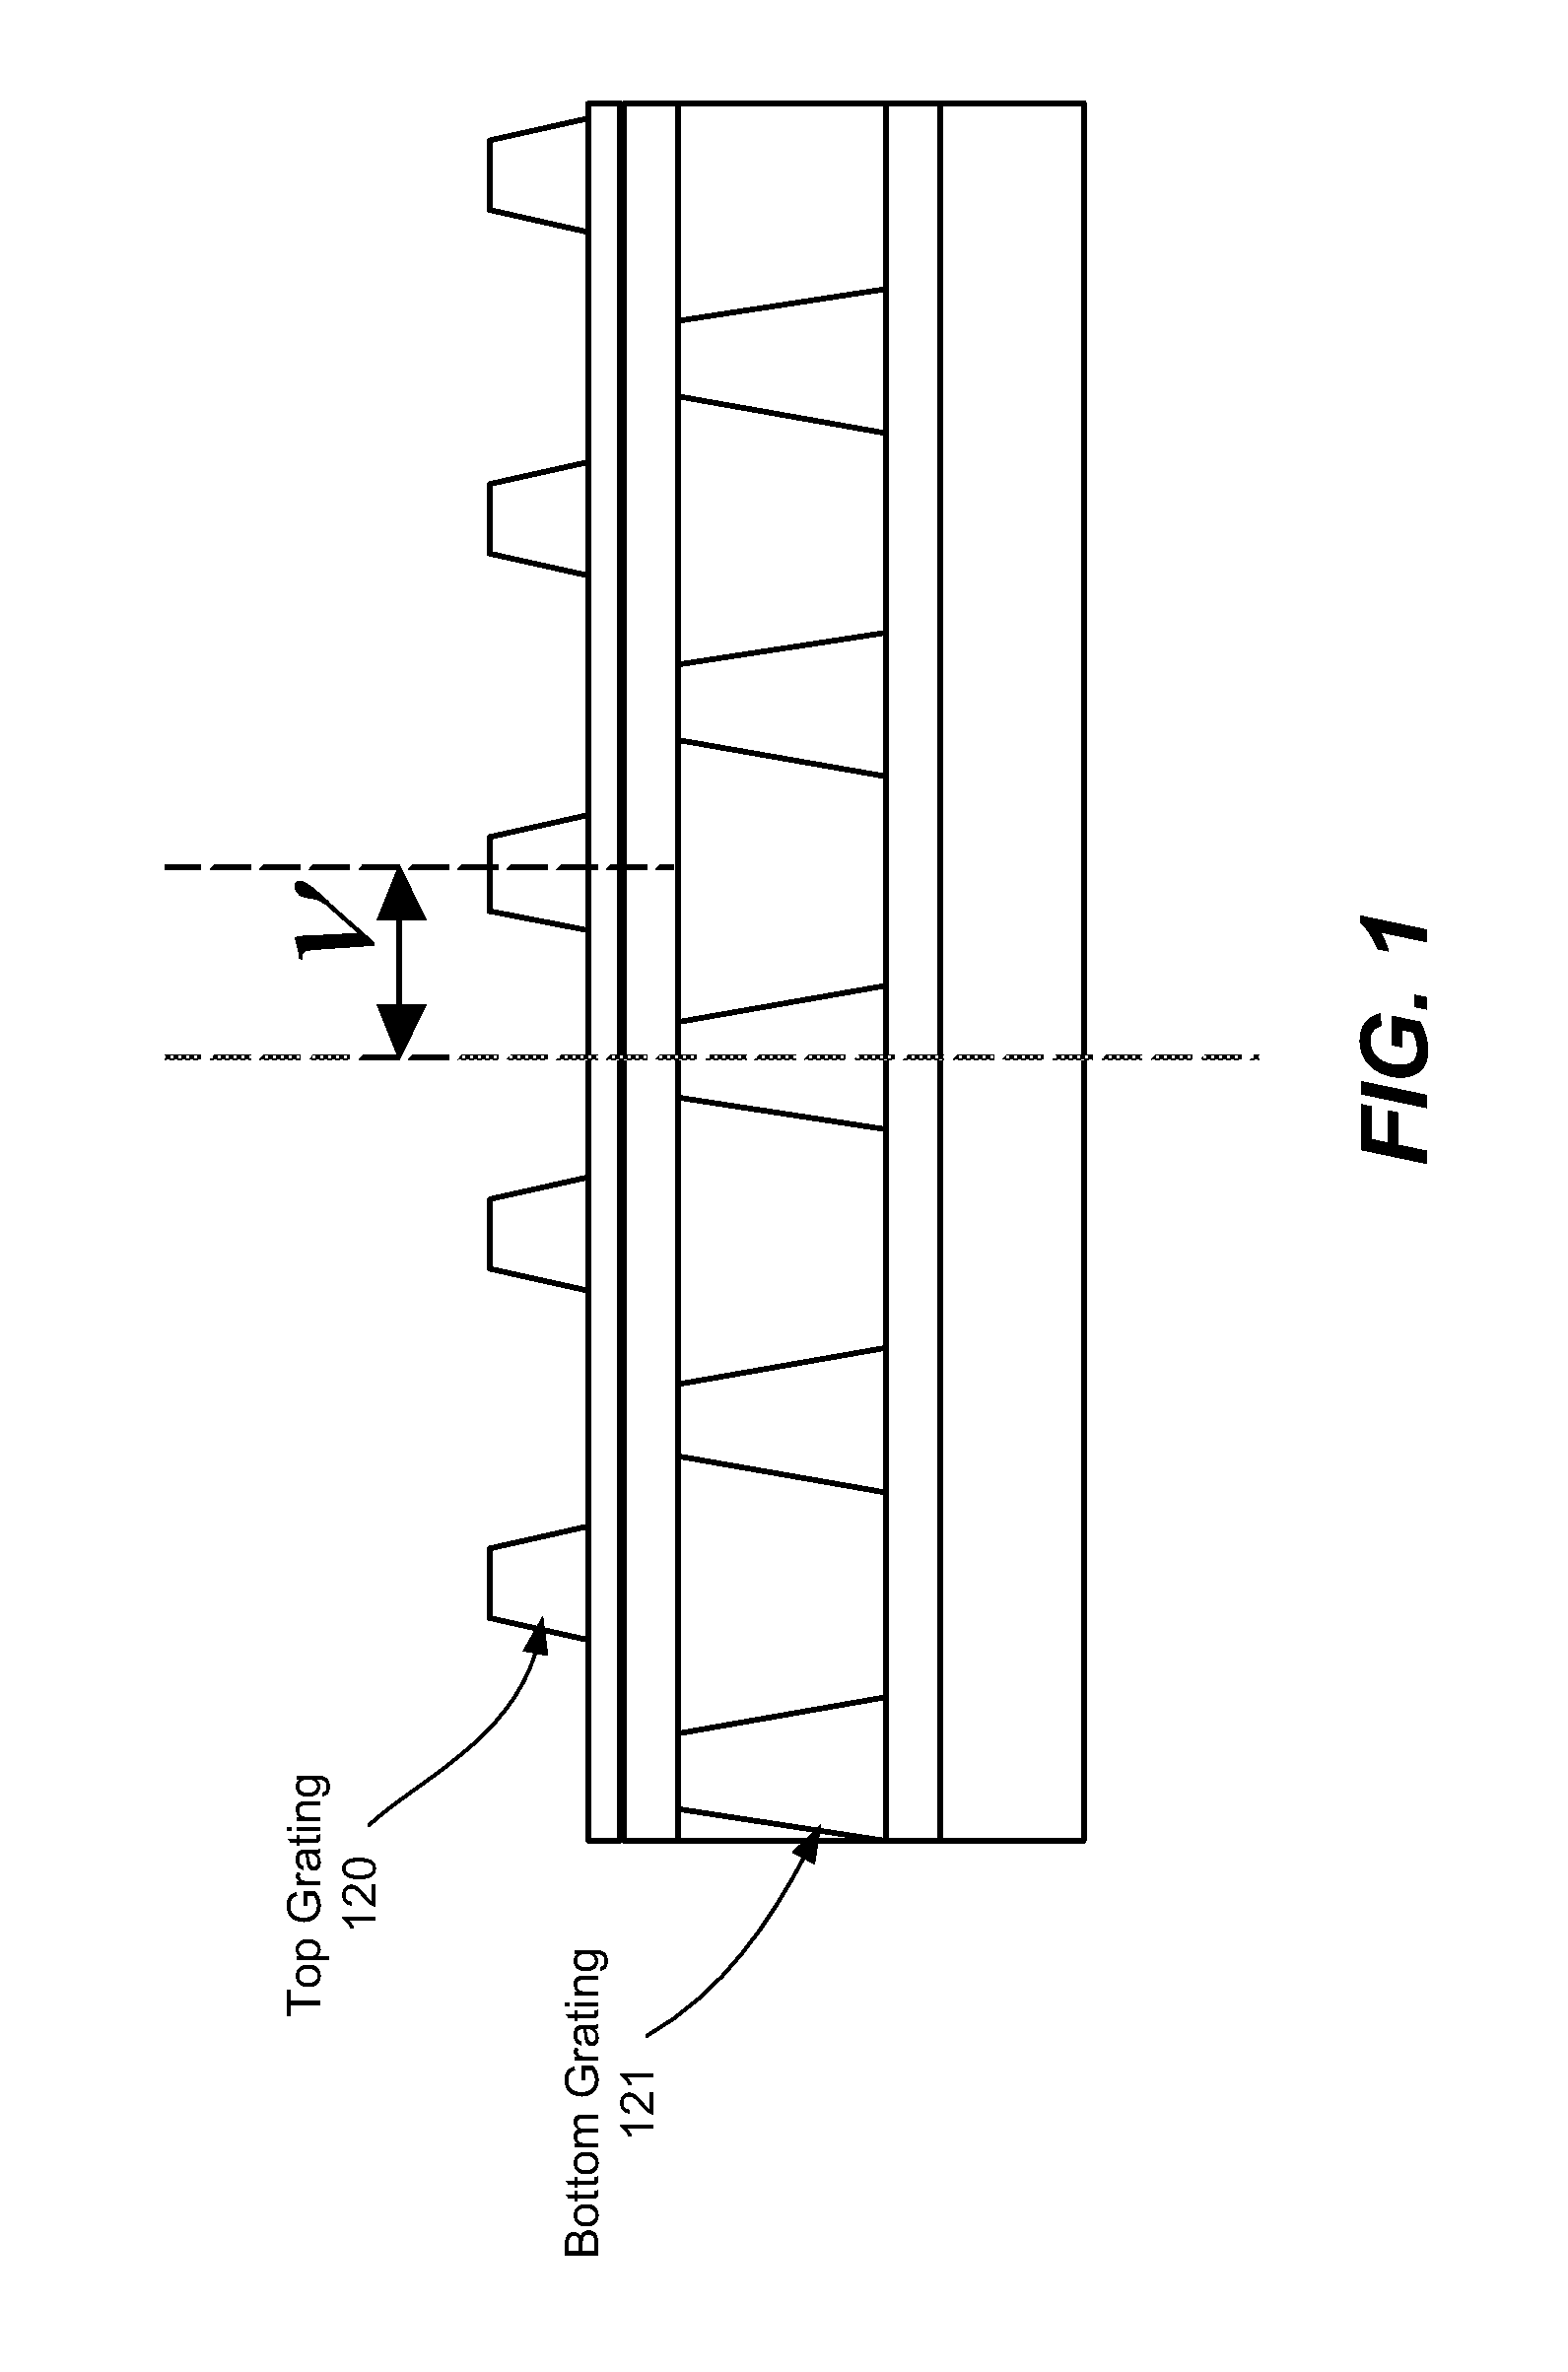 Measuring overlay and profile asymmetry using symmetric and anti-symmetric scatterometry signals